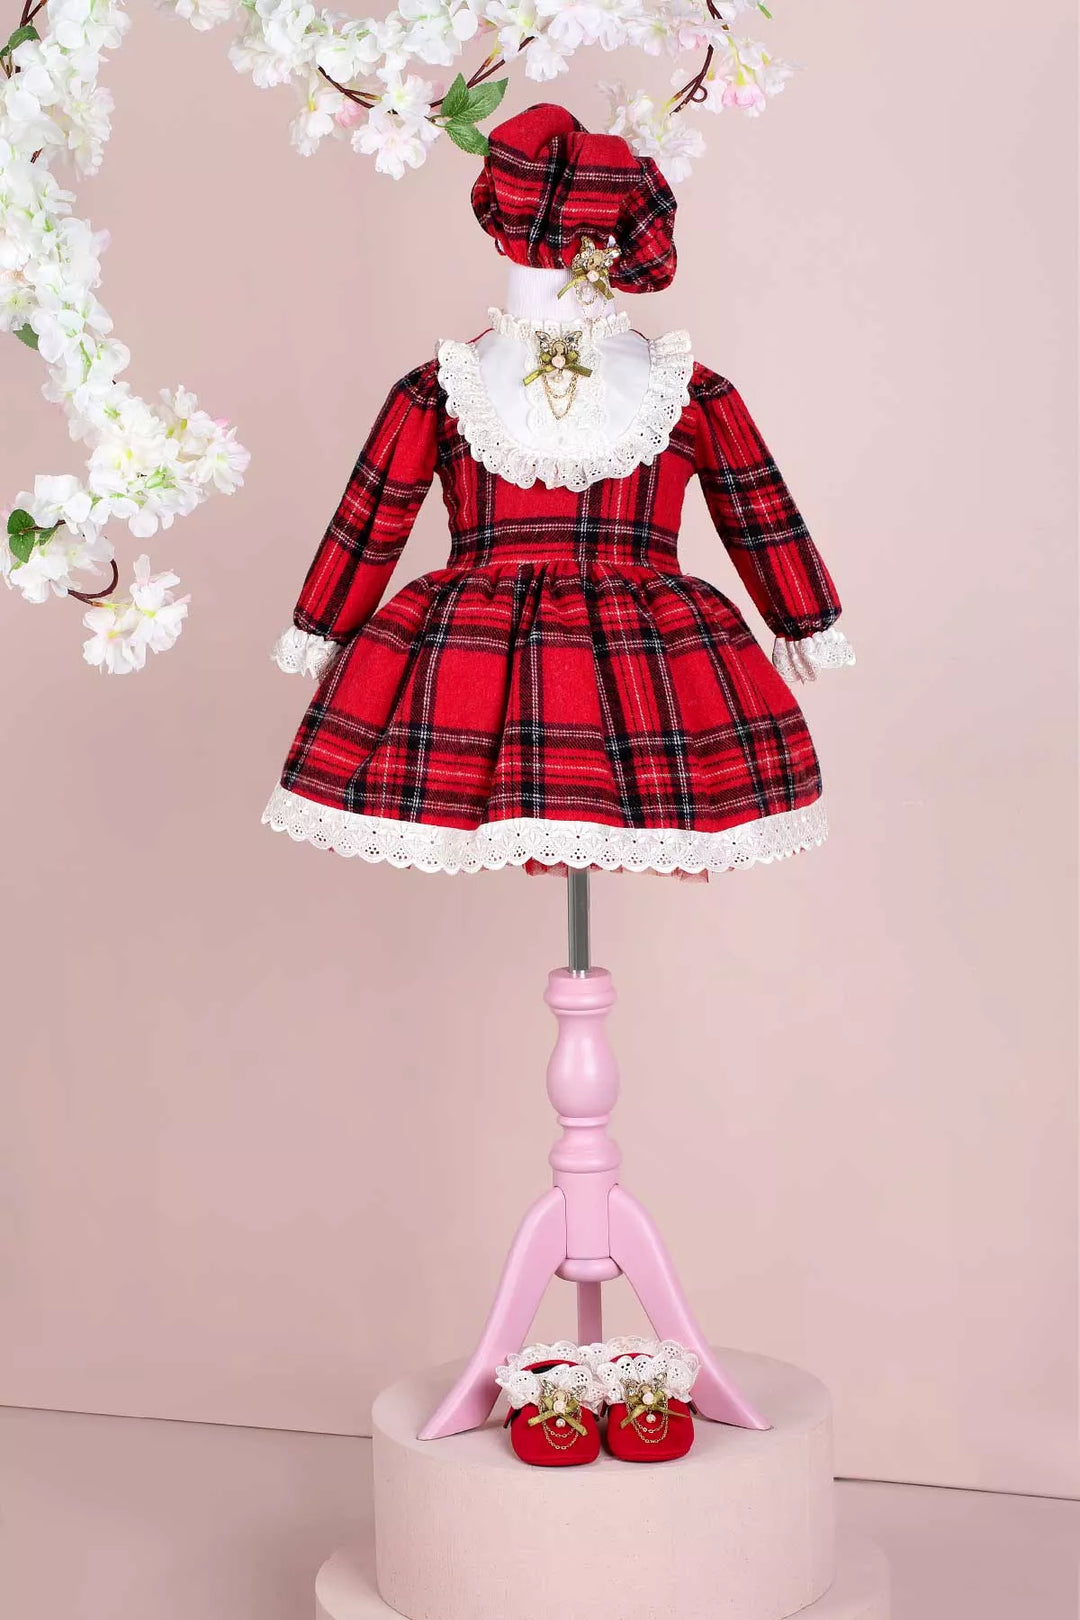 A red plaid print velvet Christmas dress set that has long sleeves, hat, brooch, and shoes